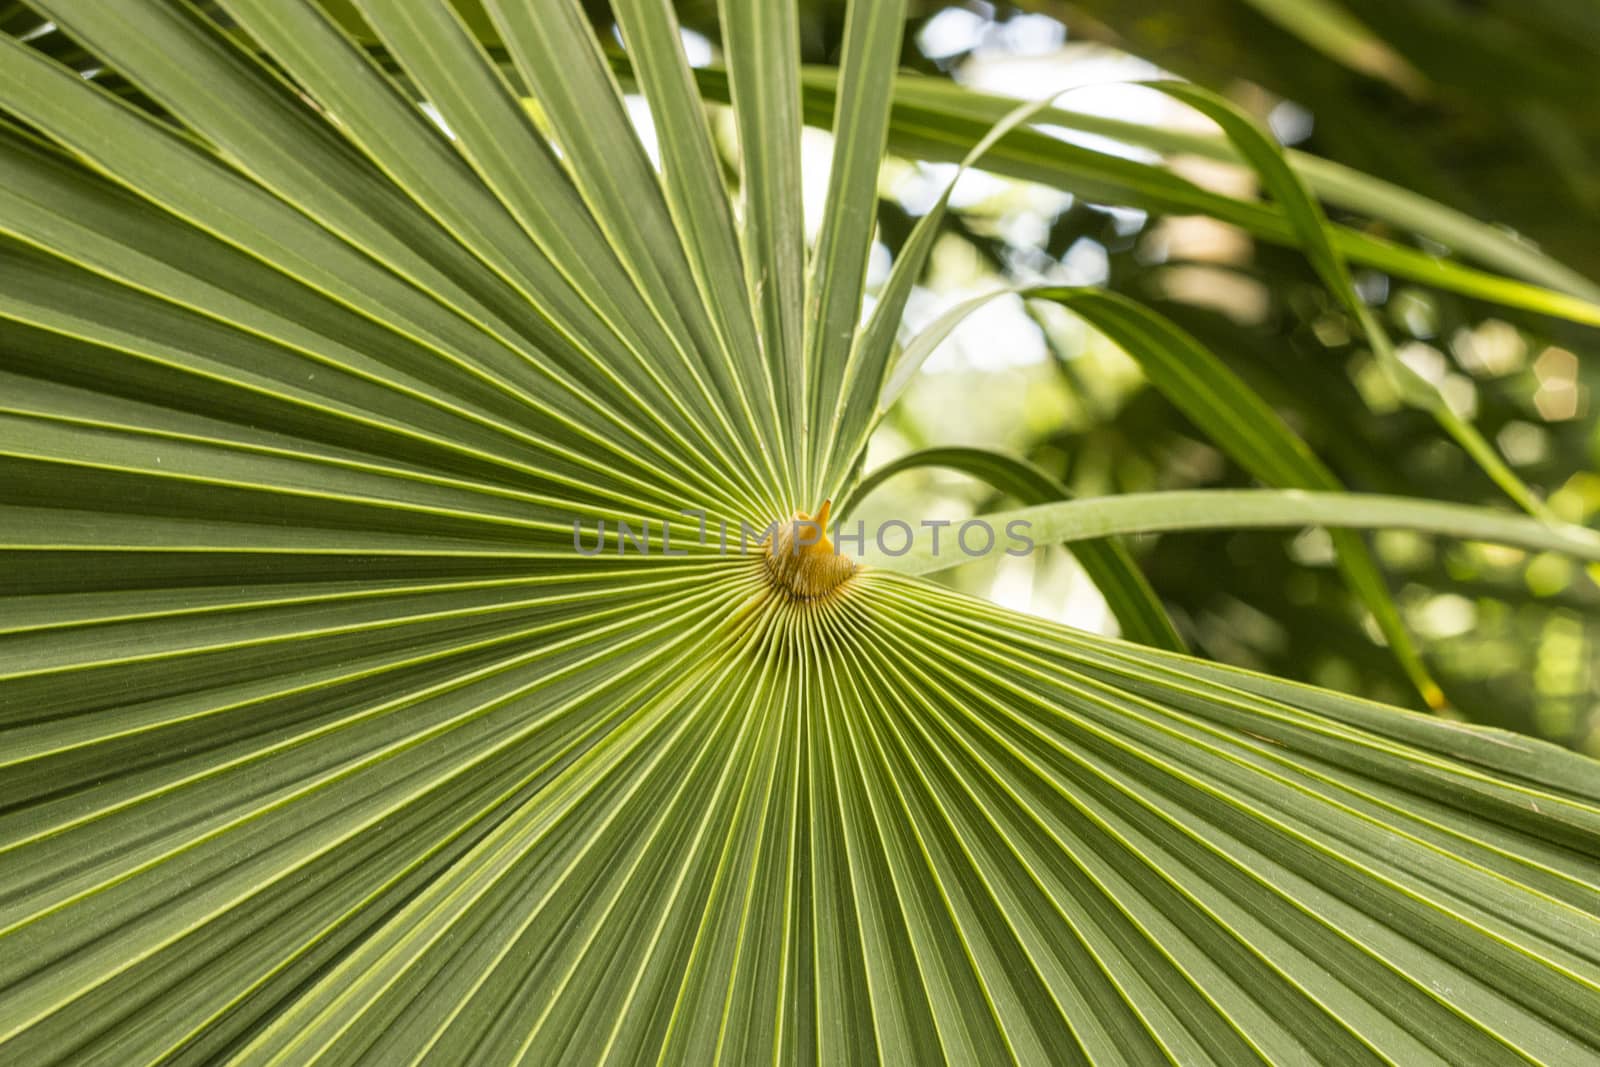 A fanned out palm leaf.